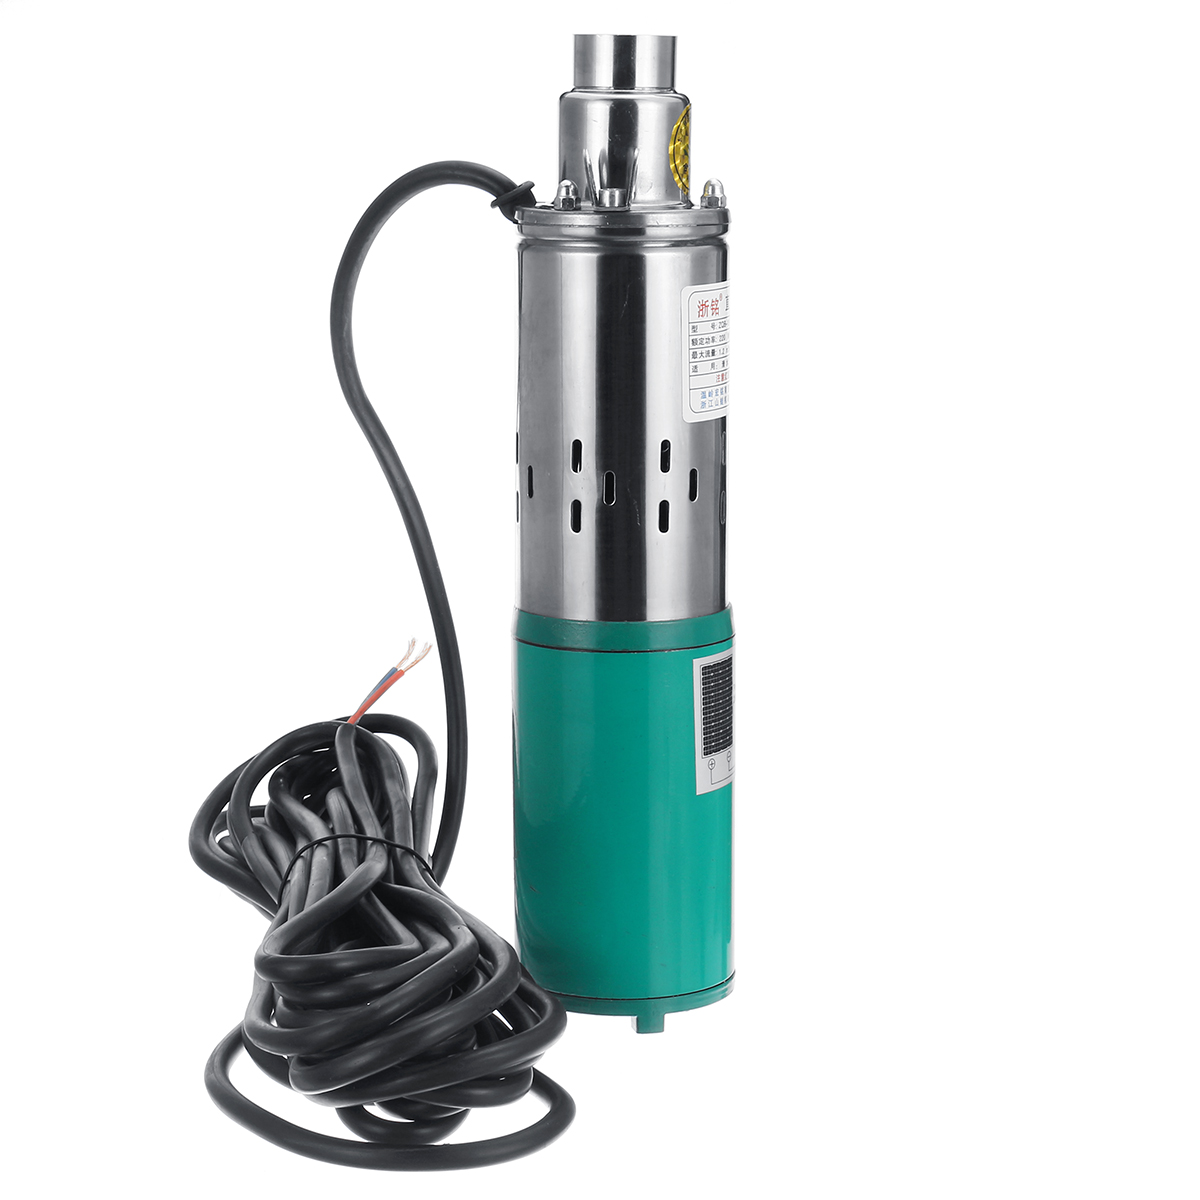 

DC 12V 1.2M³/H 220W Solar Powered Water Pump Submersible 30M Stainless Steel Deep Well Pump